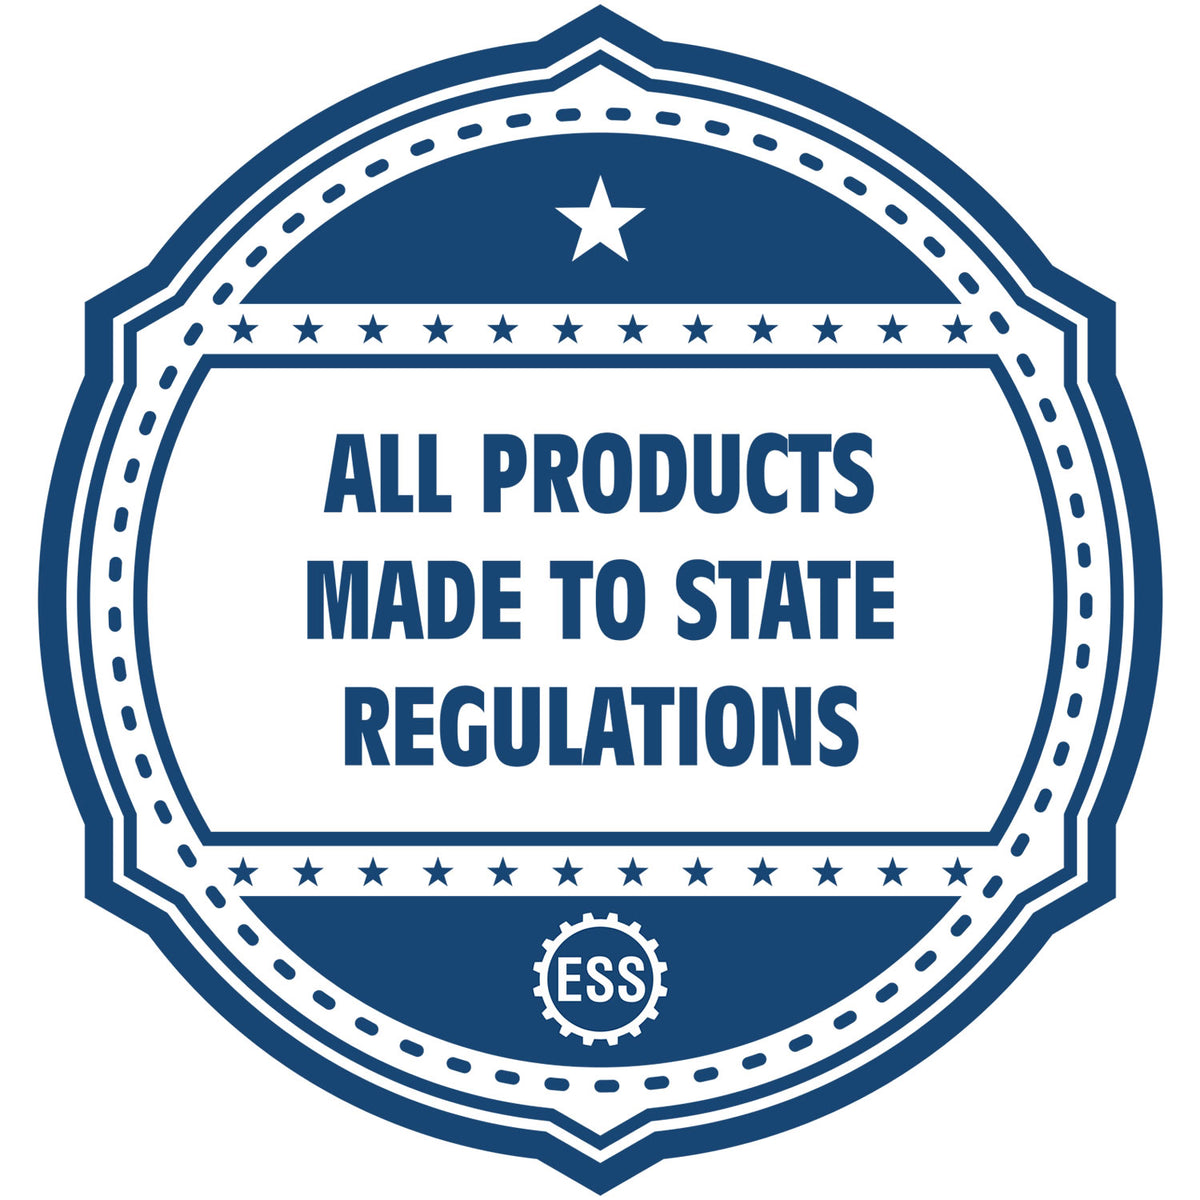 An icon or badge element for the Heavy-Duty Oklahoma Rectangular Notary Stamp showing that this product is made in compliance with state regulations.